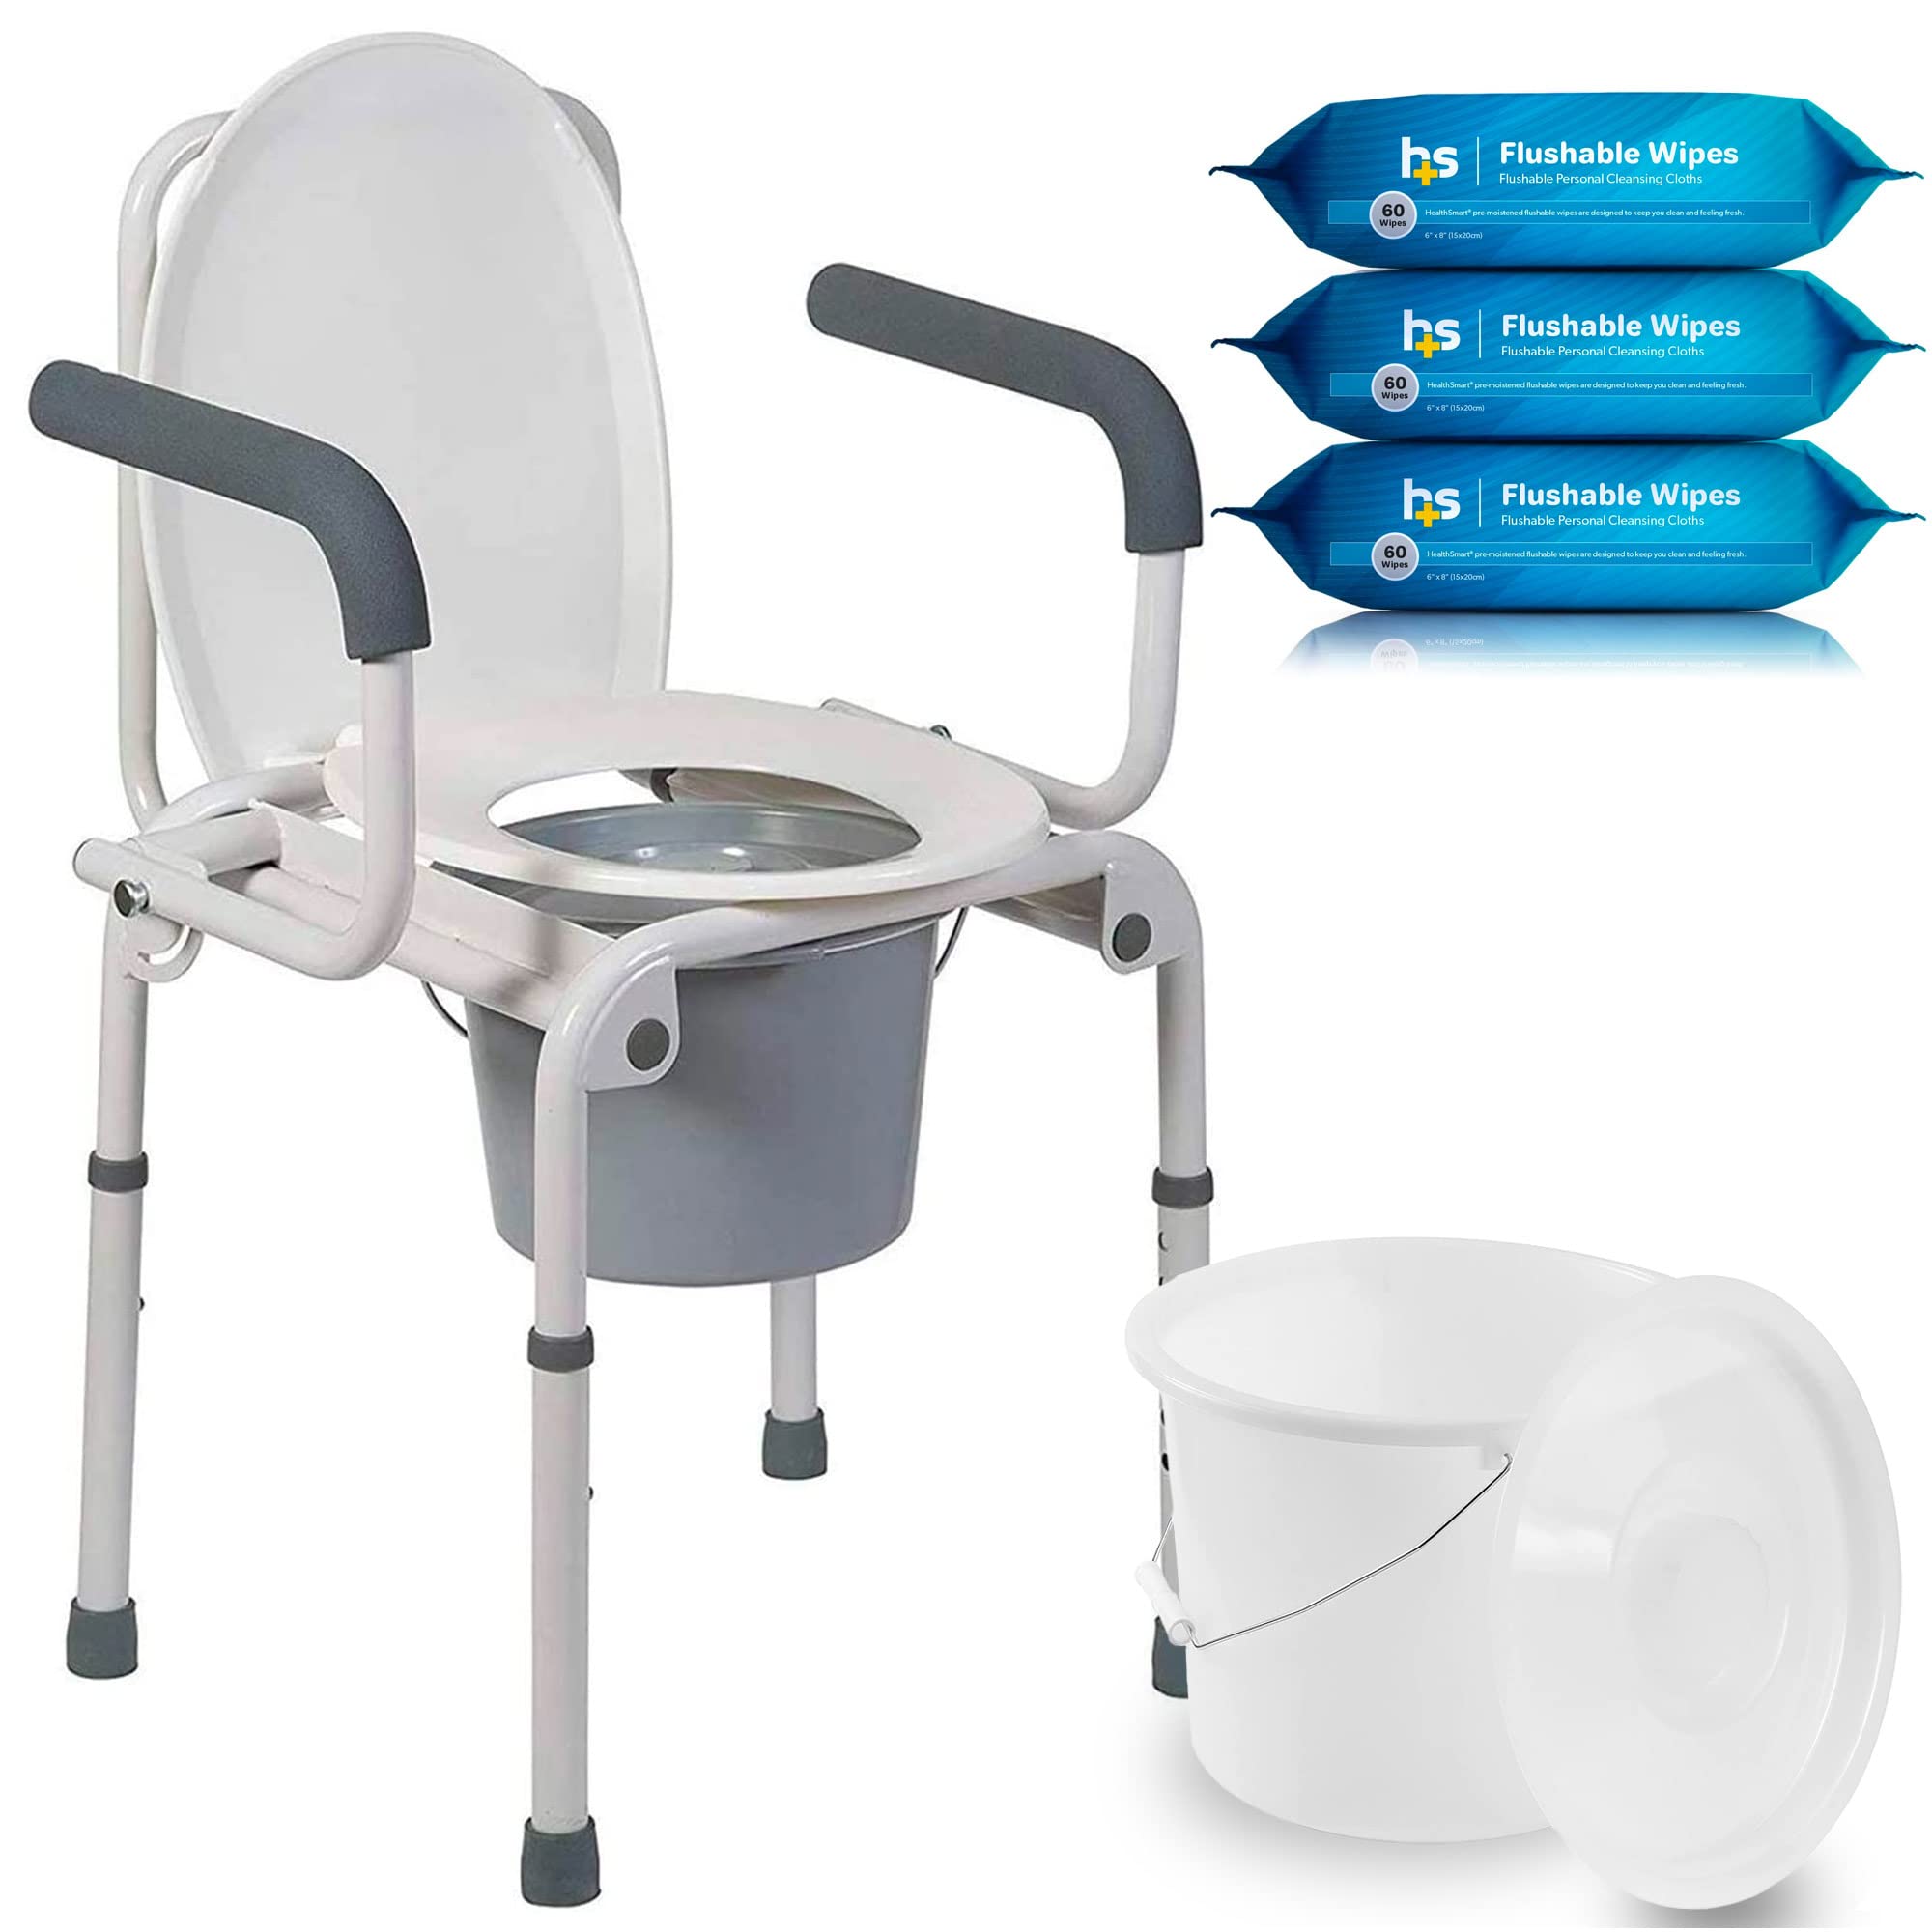 Portable Commode Kit, Includes DMI Drop Arm Commode, DMI Bedside Commode Replacement Bucket with Lid & Handle, and HealthSmart 180 Count Flushable Wipes